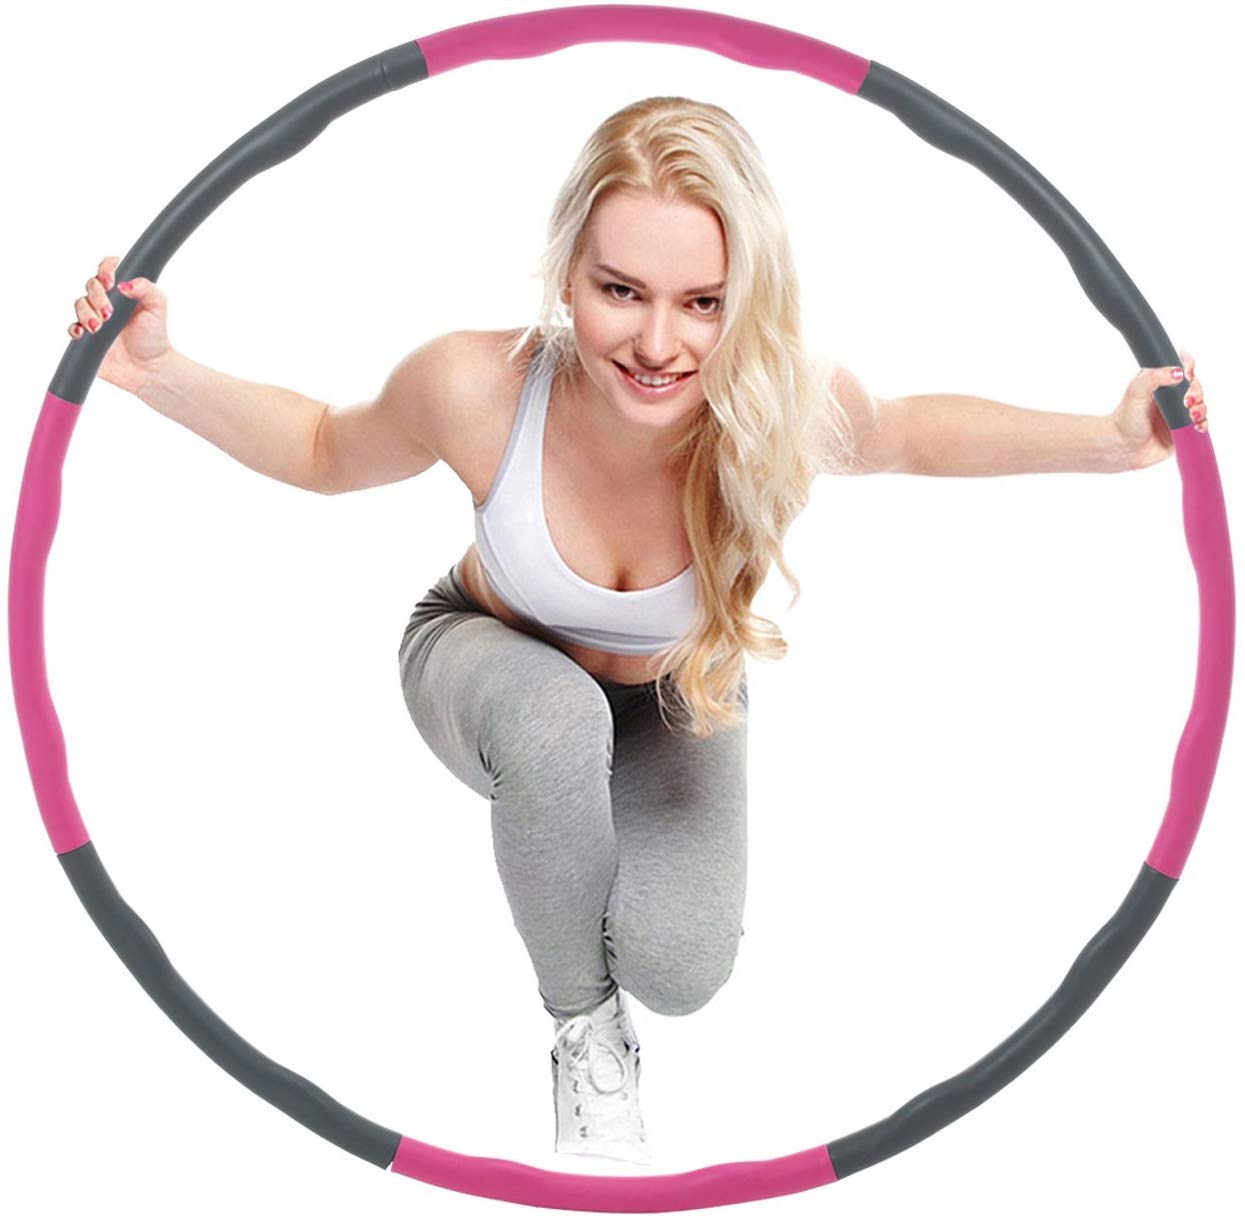 Adult Detachable Hula Hoop Fitness for Weight Loss, Counting Hoola Hoop Waist Trainer